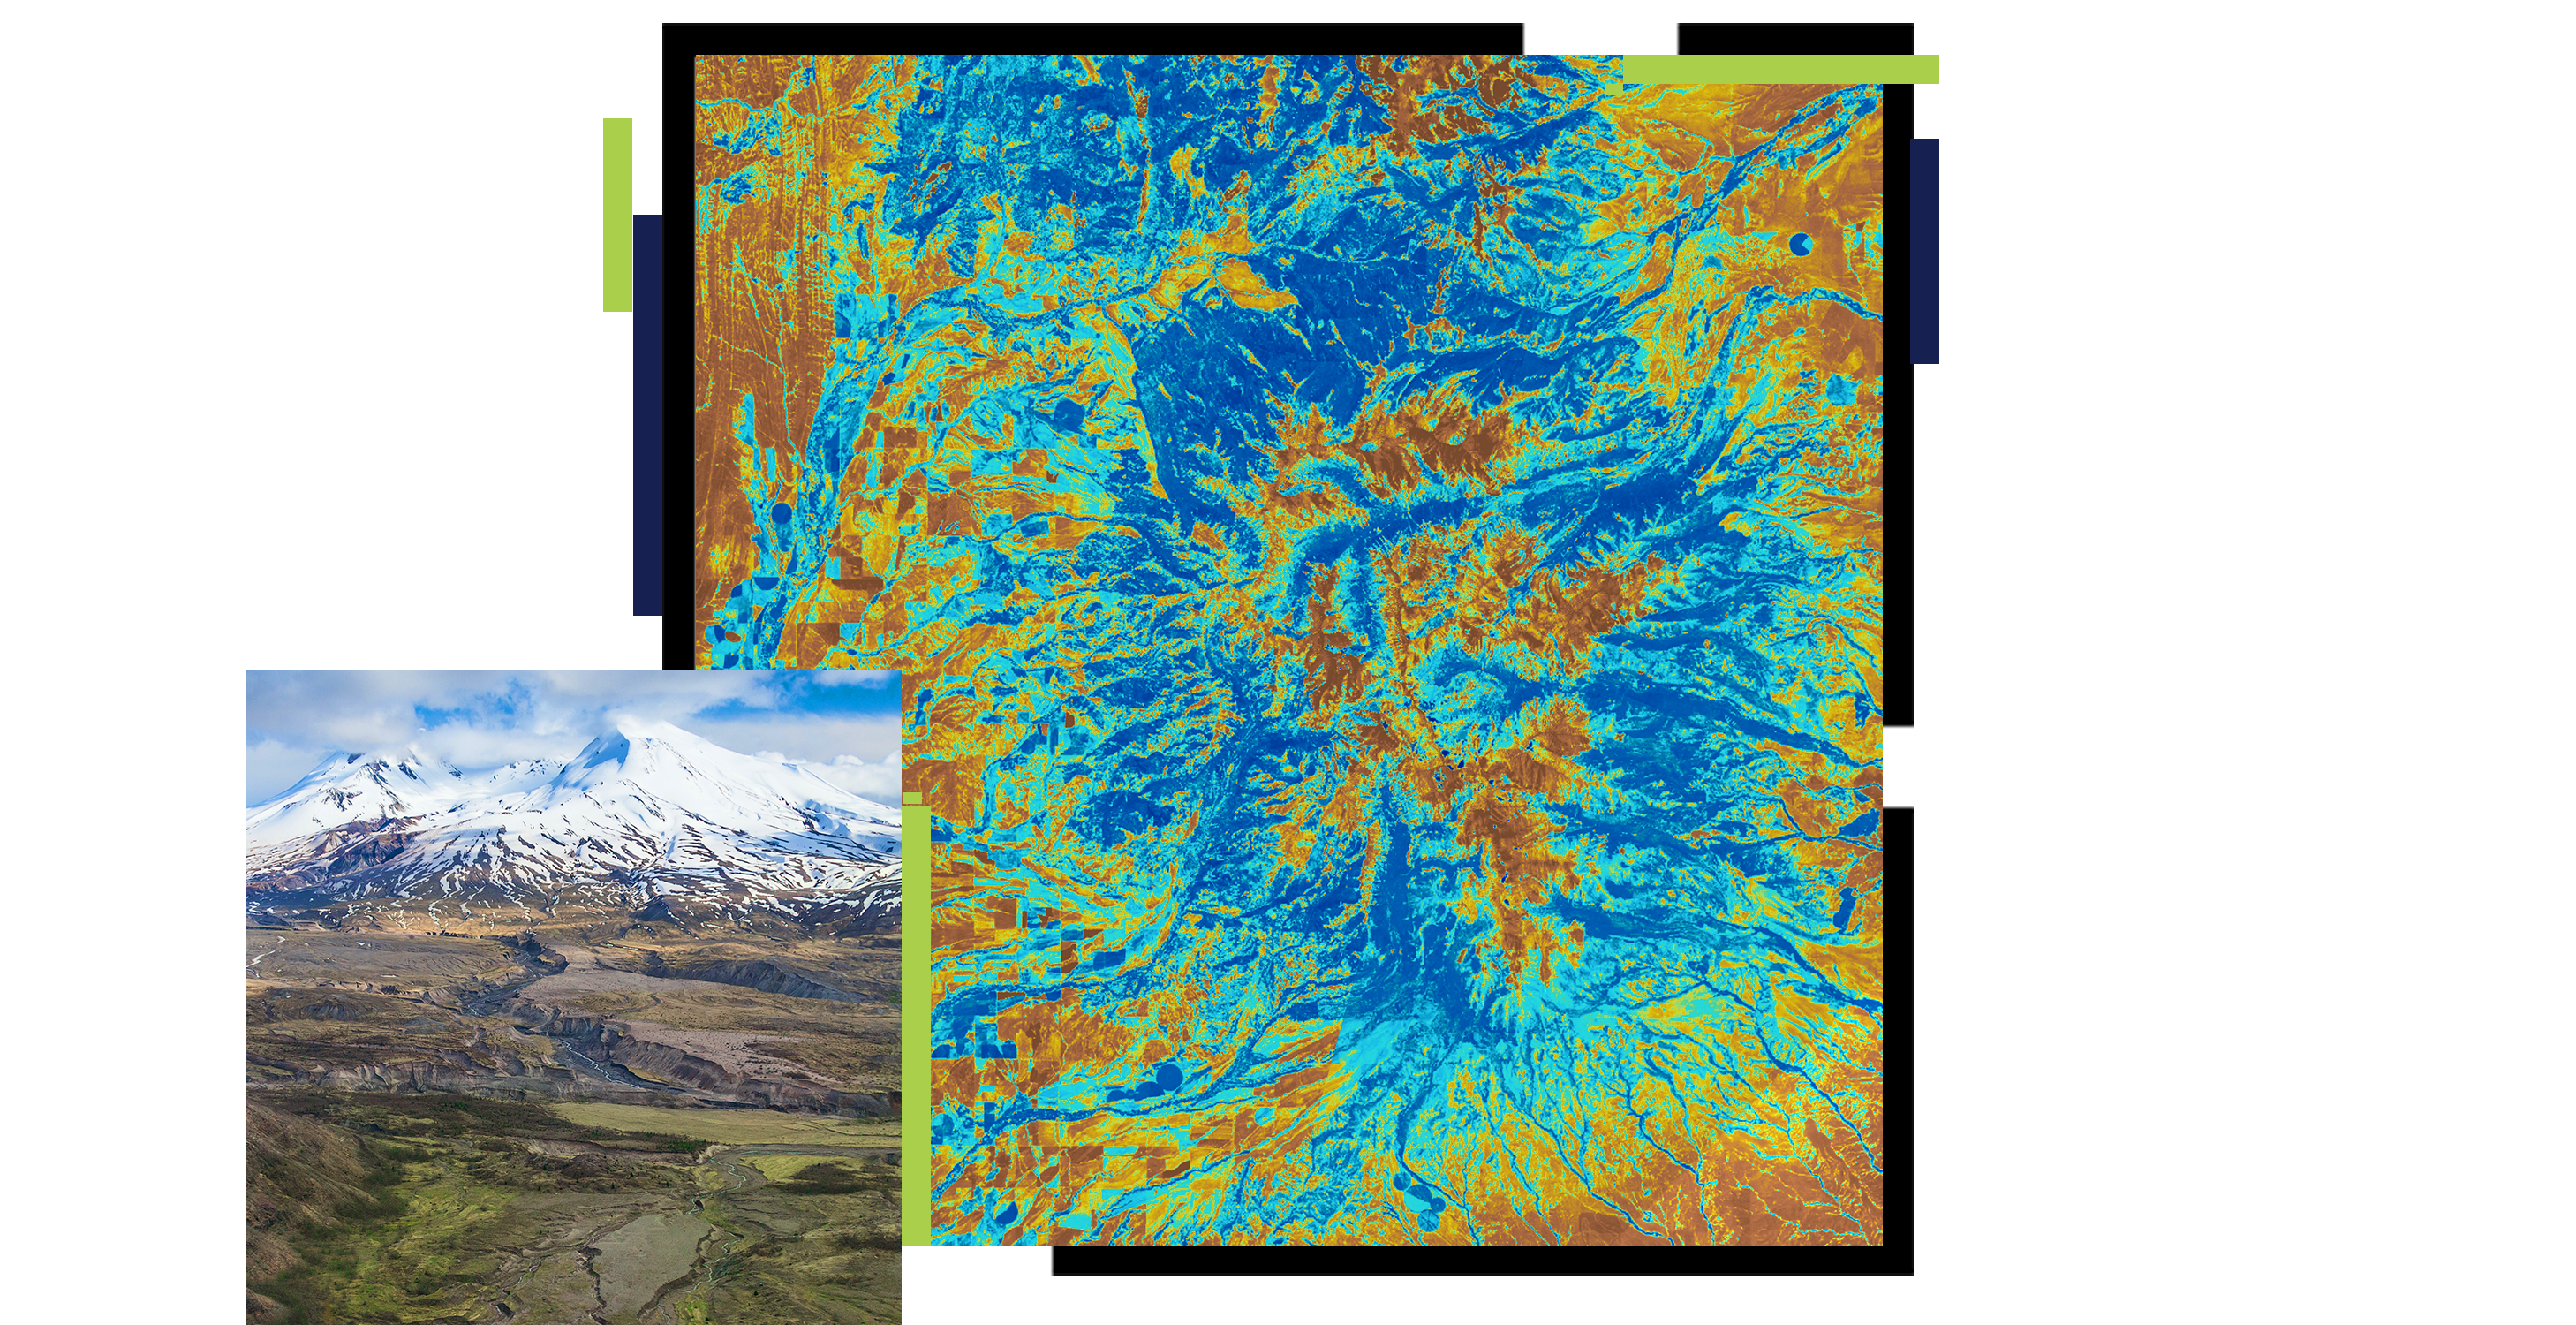 Two squares with a landscape of dried canyons leading to a snowing mountain and a colorful map